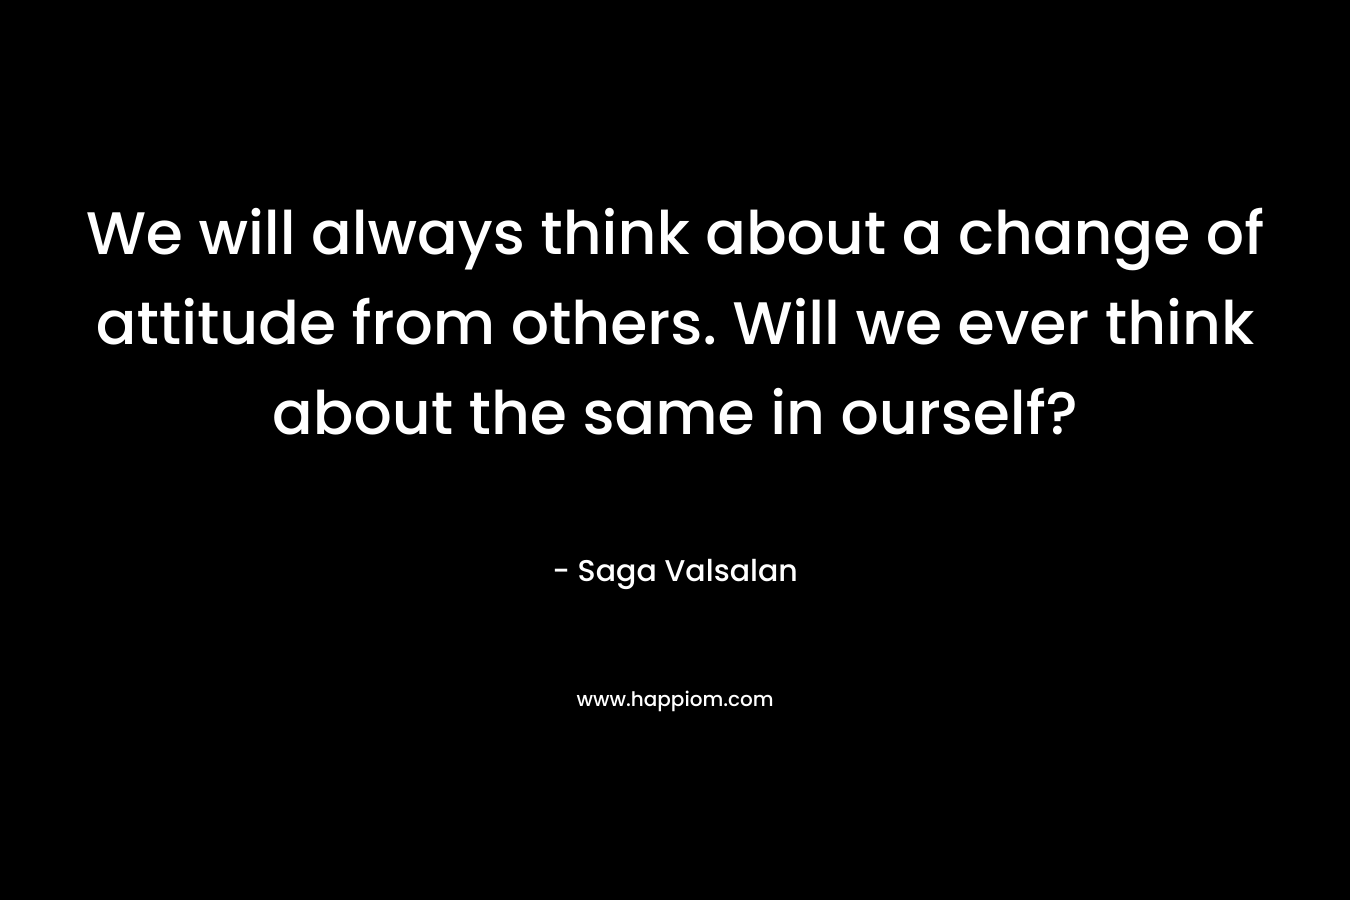 We will always think about a change of attitude from others. Will we ever think about the same in ourself? – Saga Valsalan